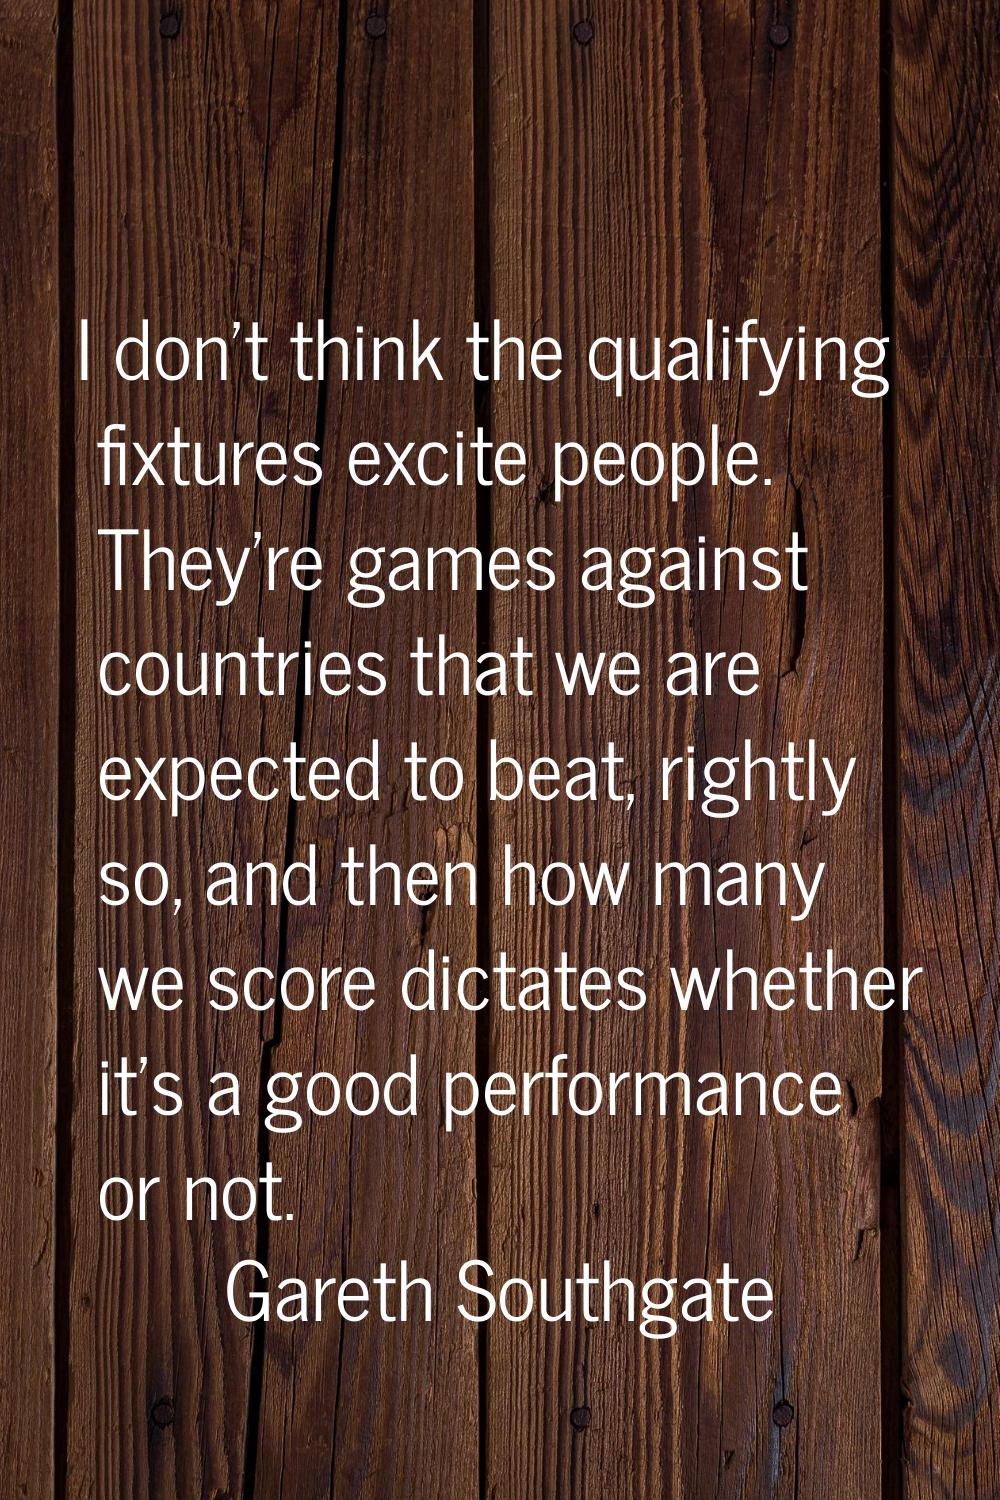 I don't think the qualifying fixtures excite people. They're games against countries that we are ex